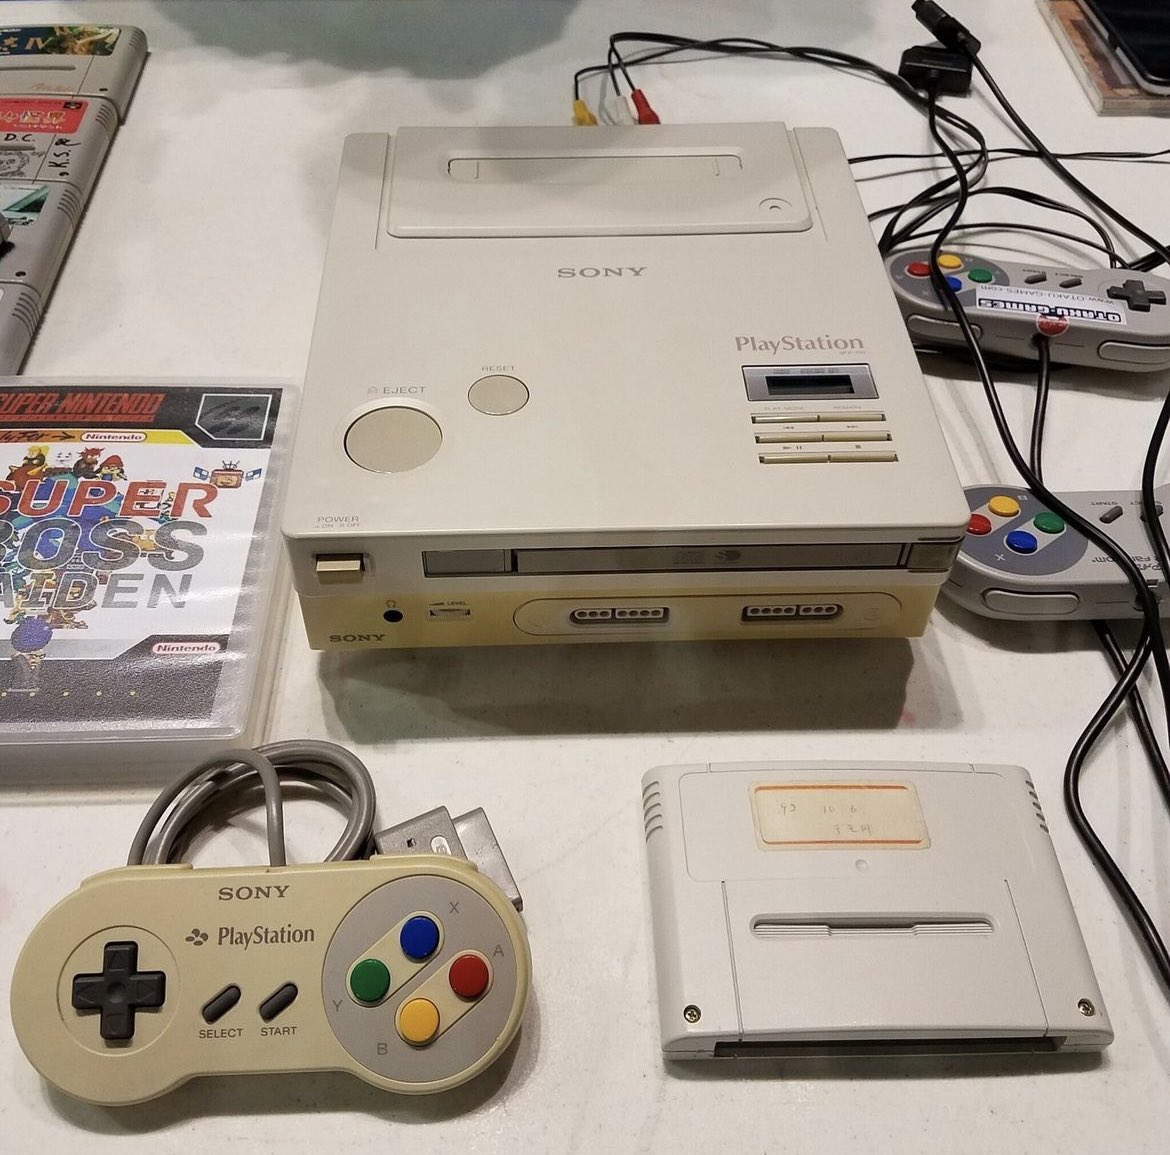 The only known Nintendo PlayStation prototype which sold for $360,000 in 2020.